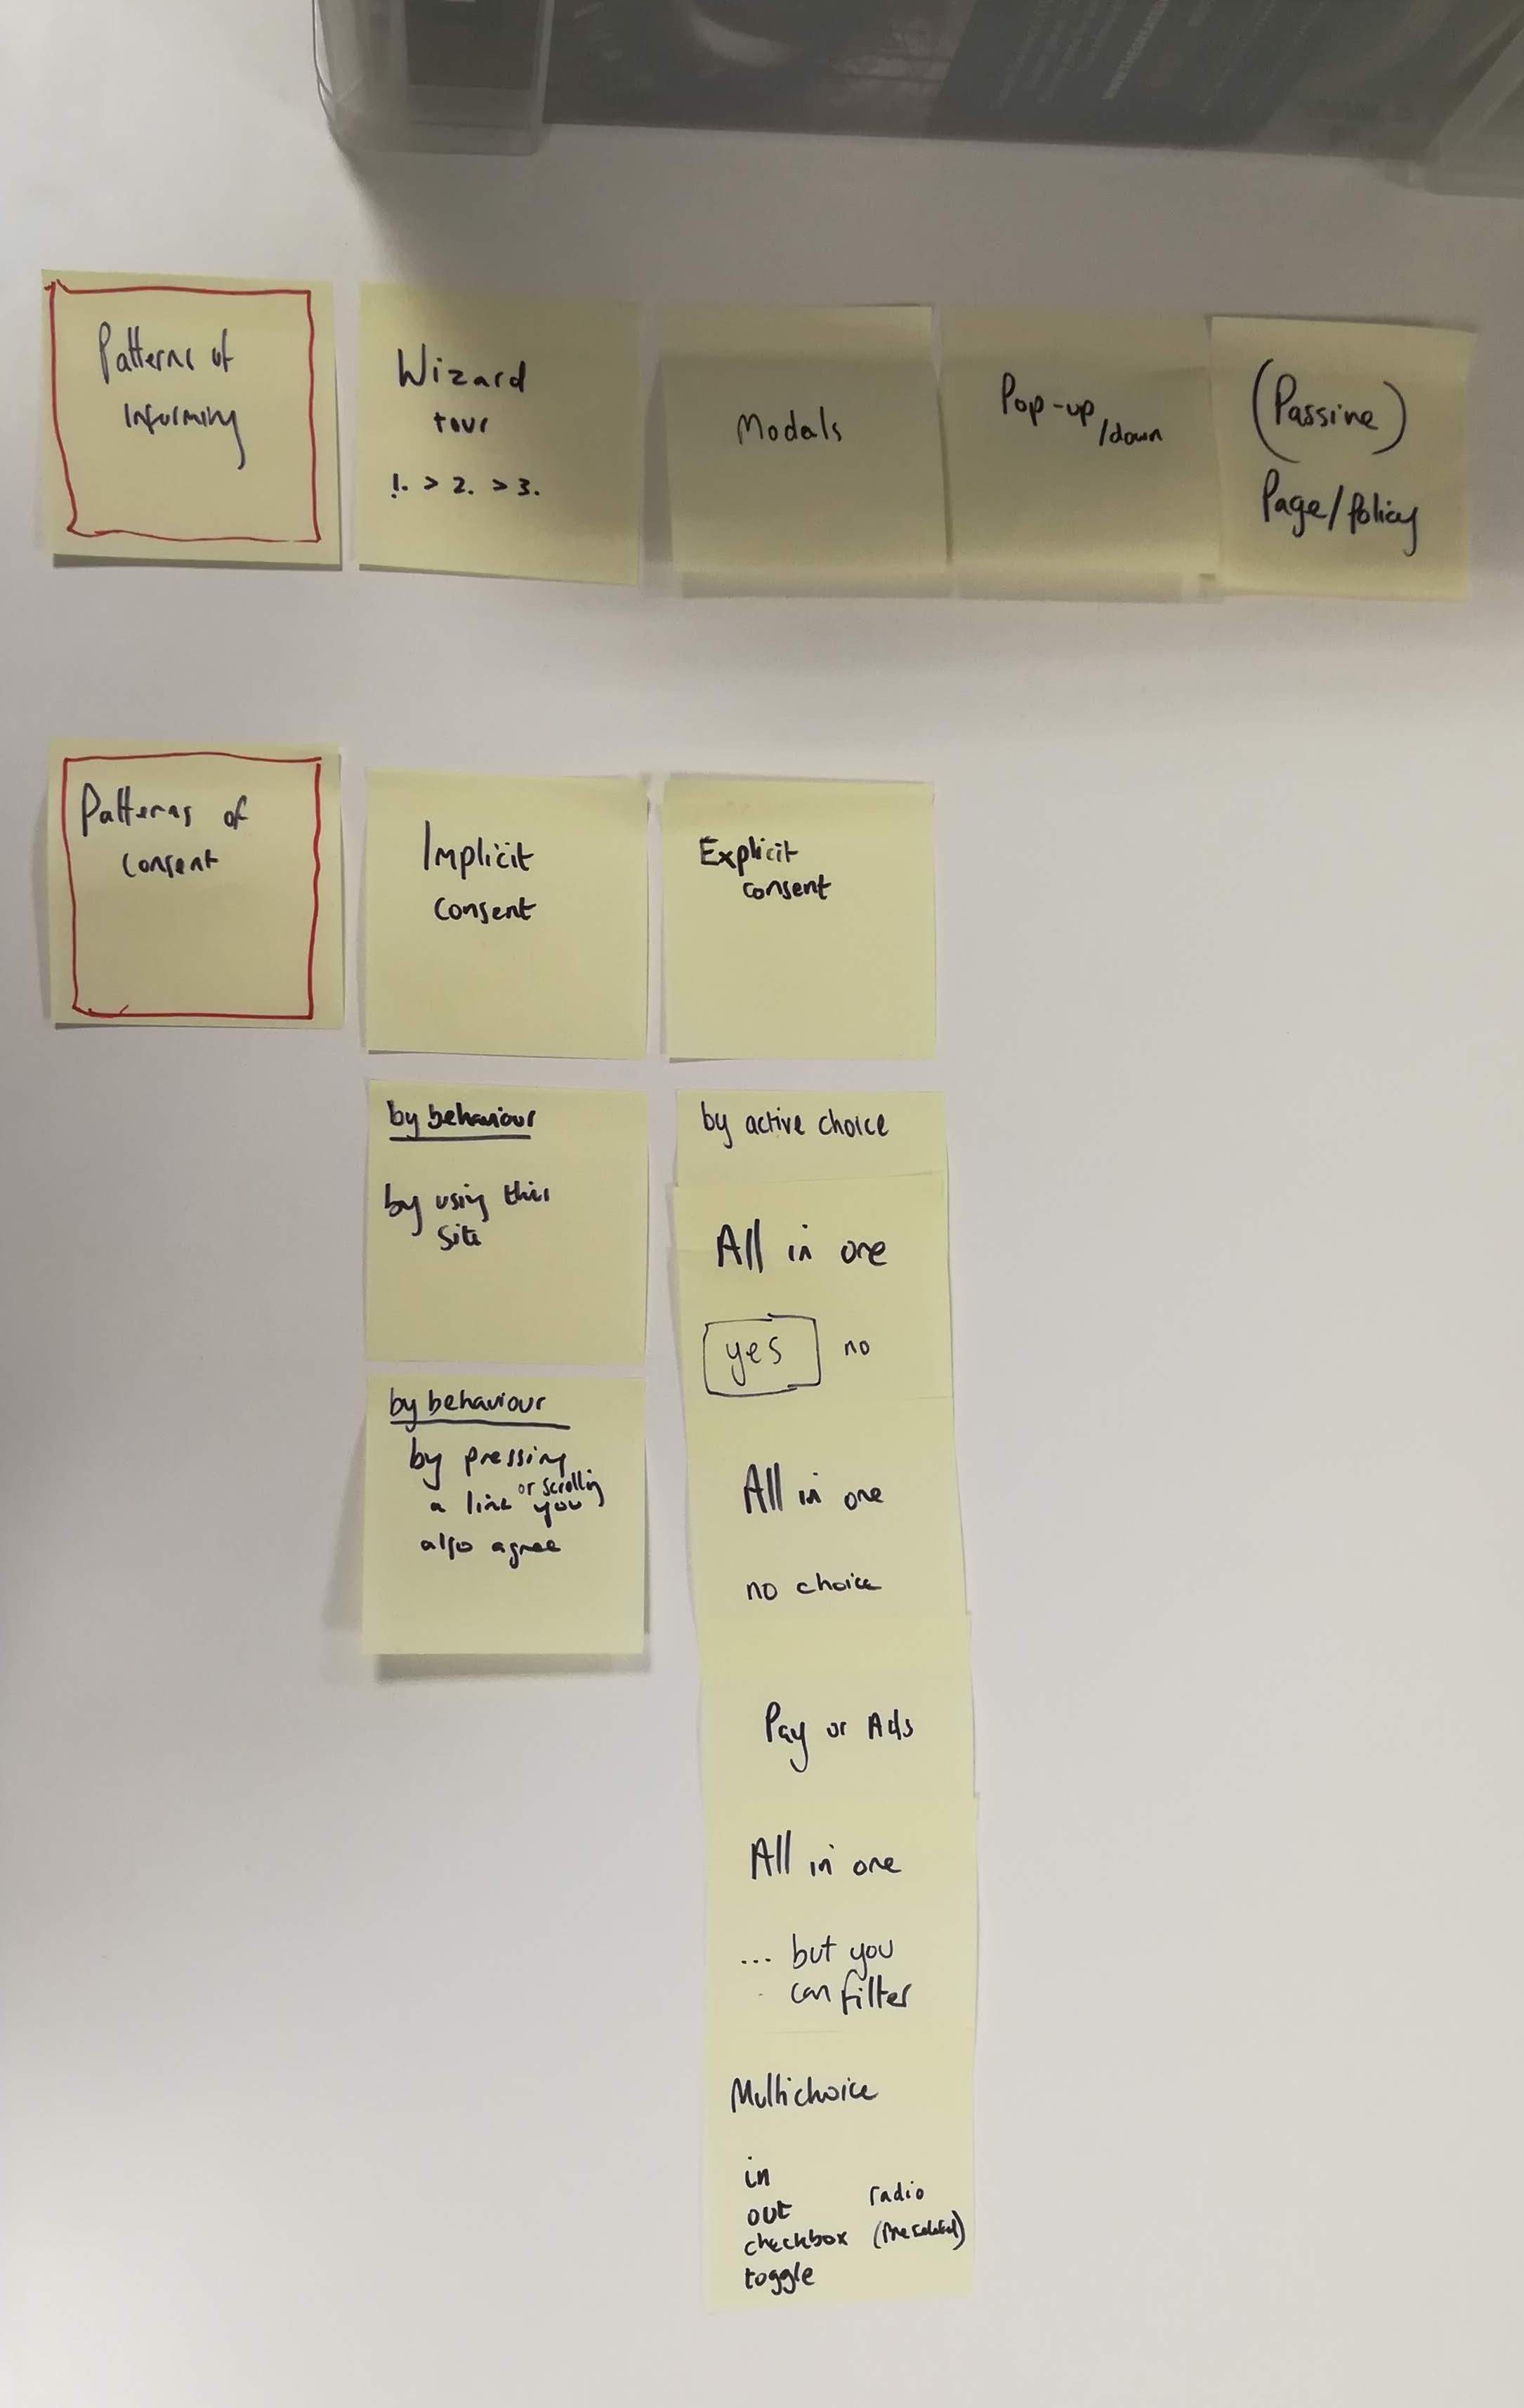 Sticky notes arranged on a worktop. Grouping types of consent by being implicit or explicit. As well as patterns used to inform, rather than capture consent.